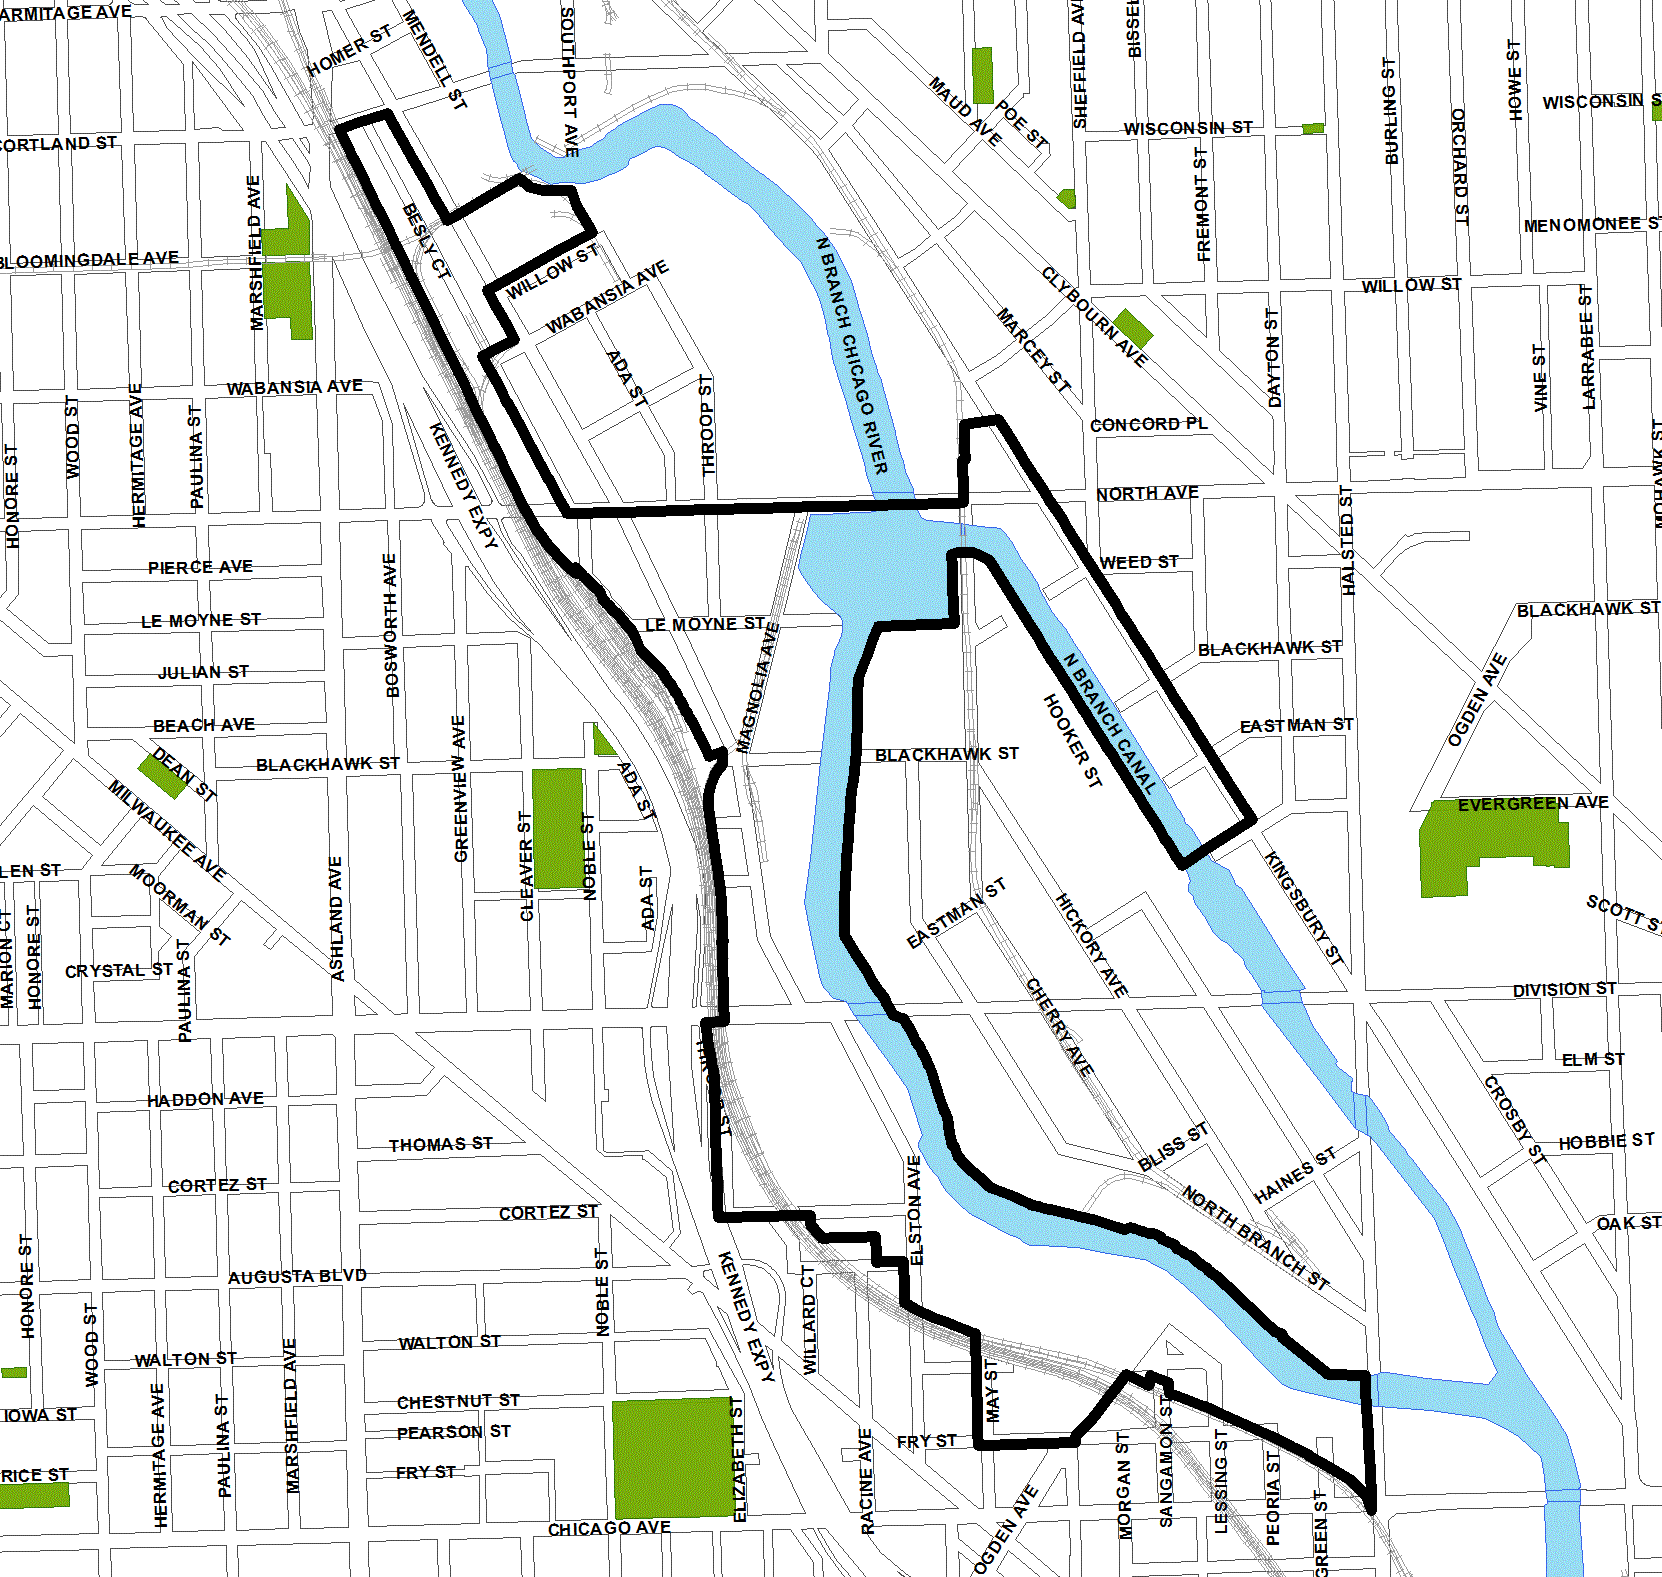 North Branch South TIF district, roughly bounded on the north by Armitage Avenue, Chicago Avenue on the south, Clybourn Avenue and Kingsbury Street on the east, and the Kennedy Expressway on the west.